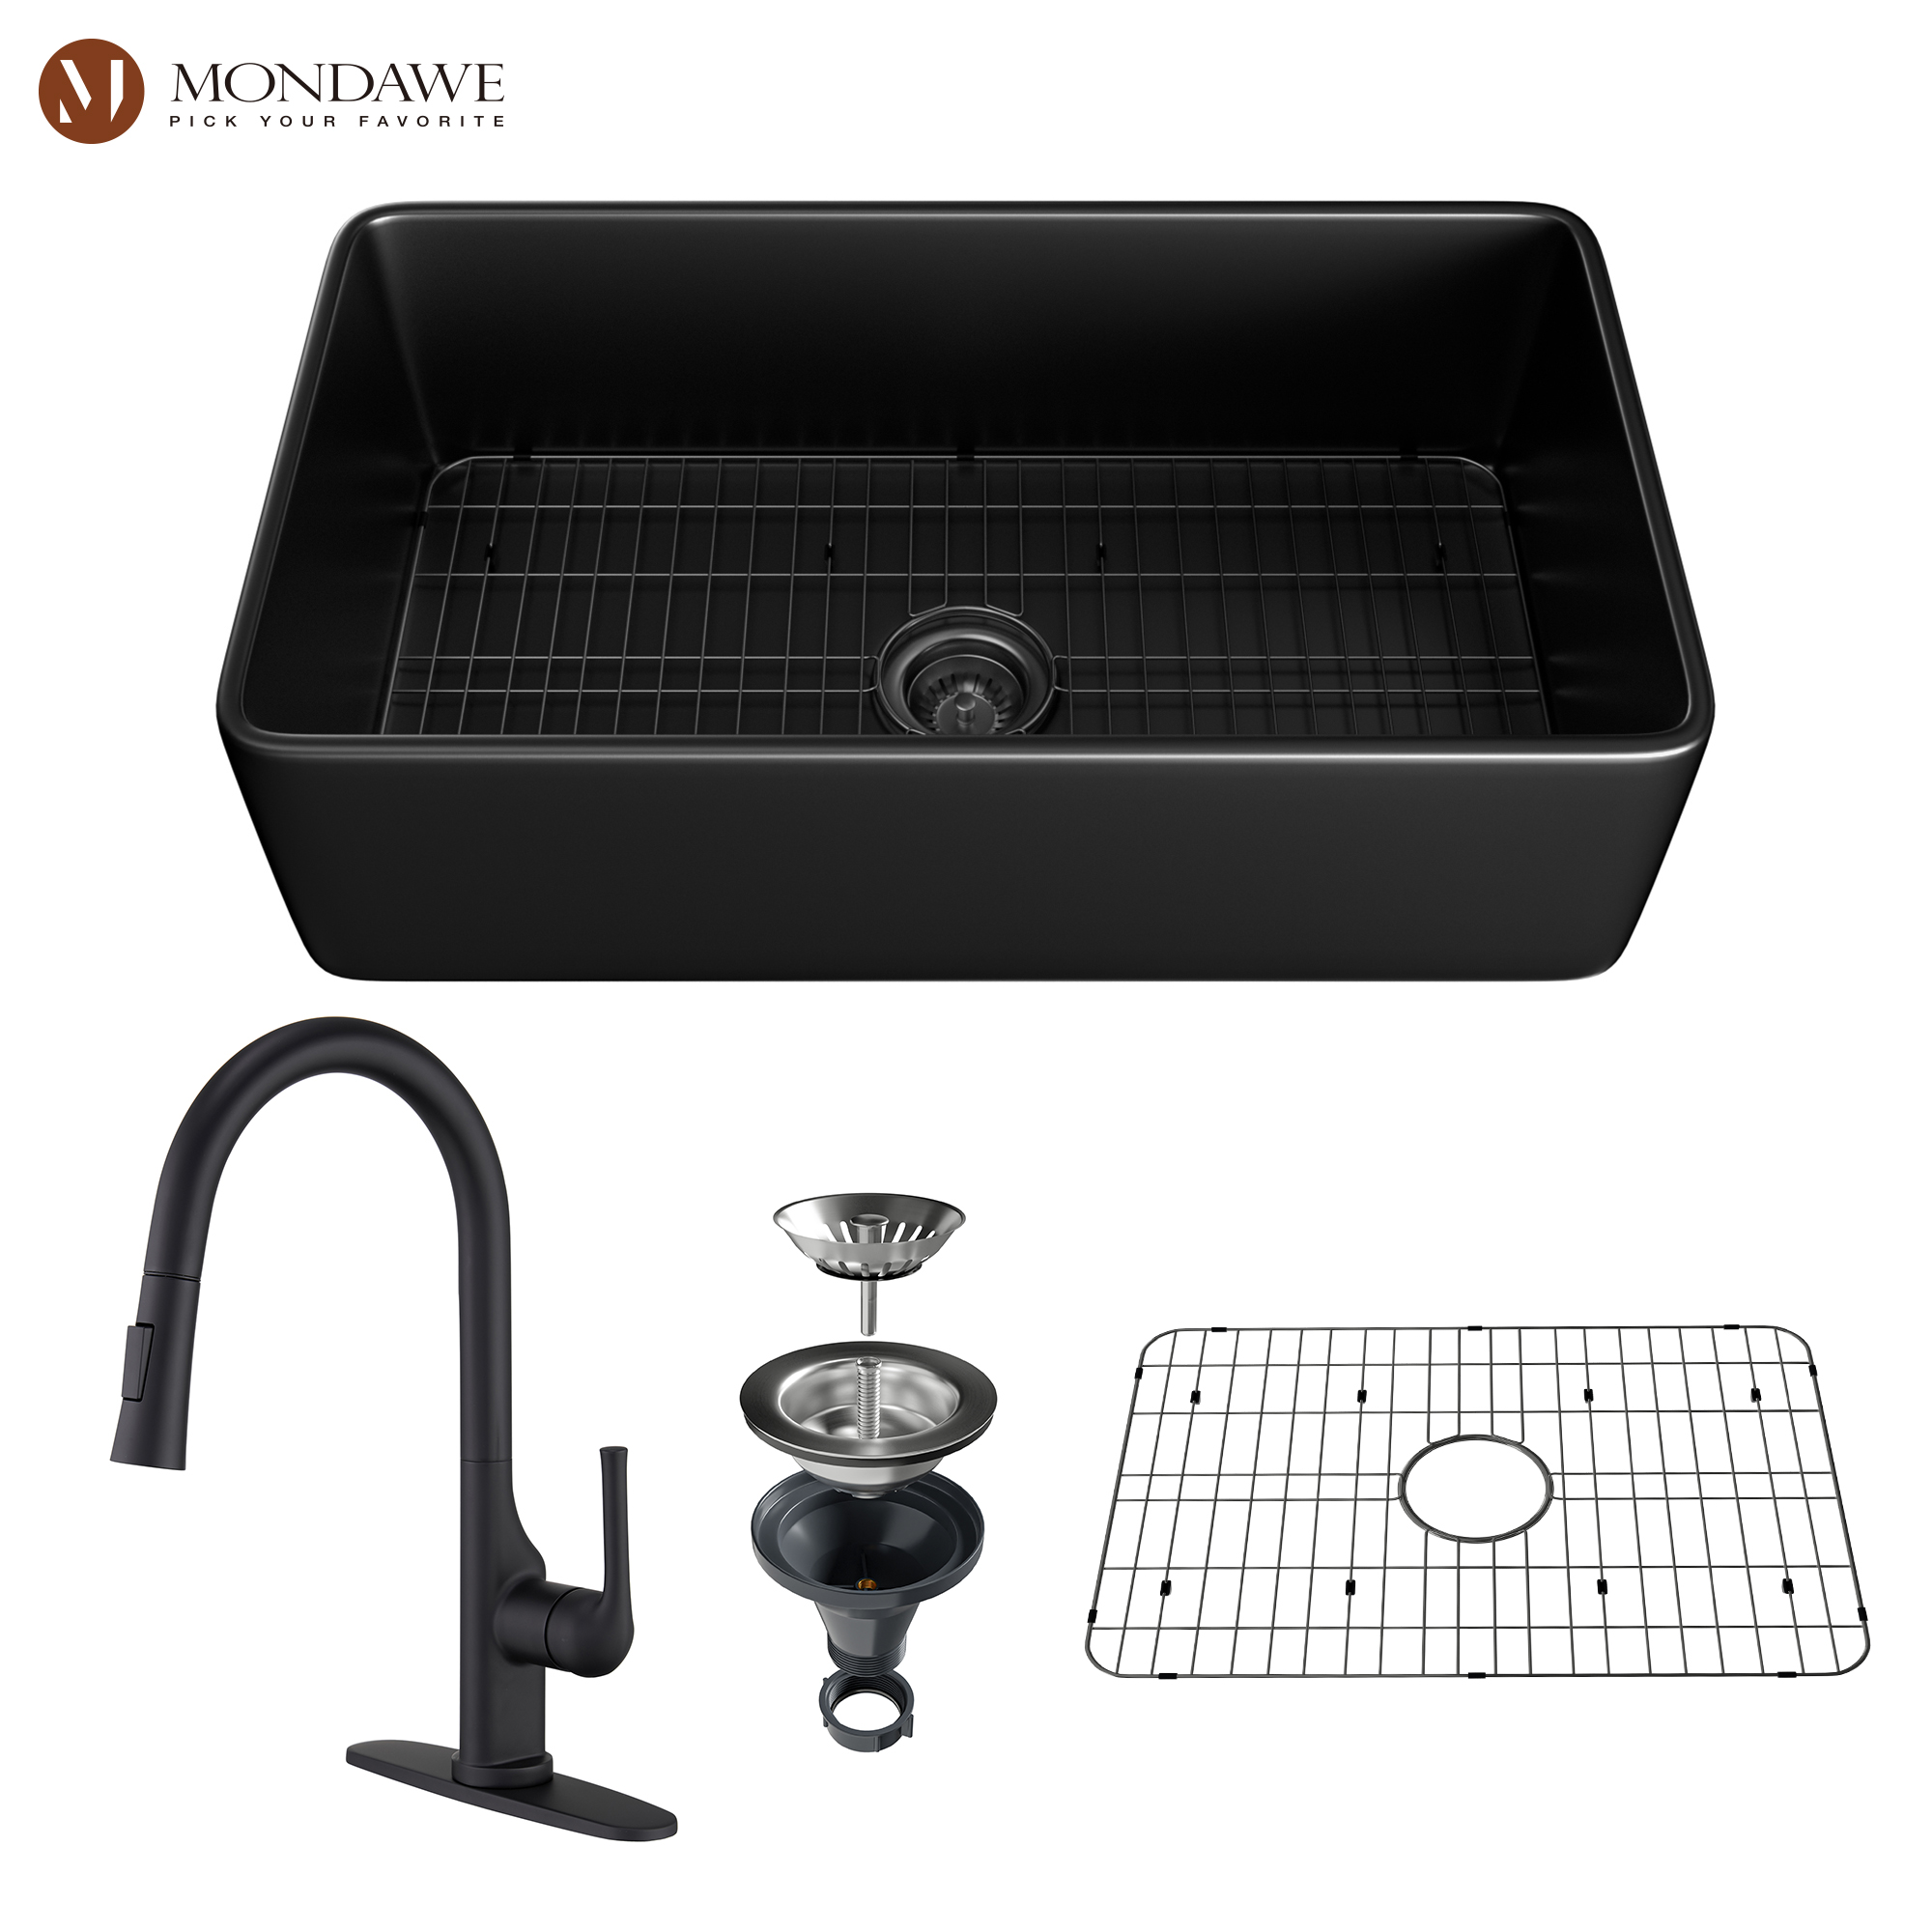 Farmhouse 33 In. Matte Black Single Bowl Fireclay Kitchen Sink Comes With Pull Down Kitchen Faucet-Mondawe